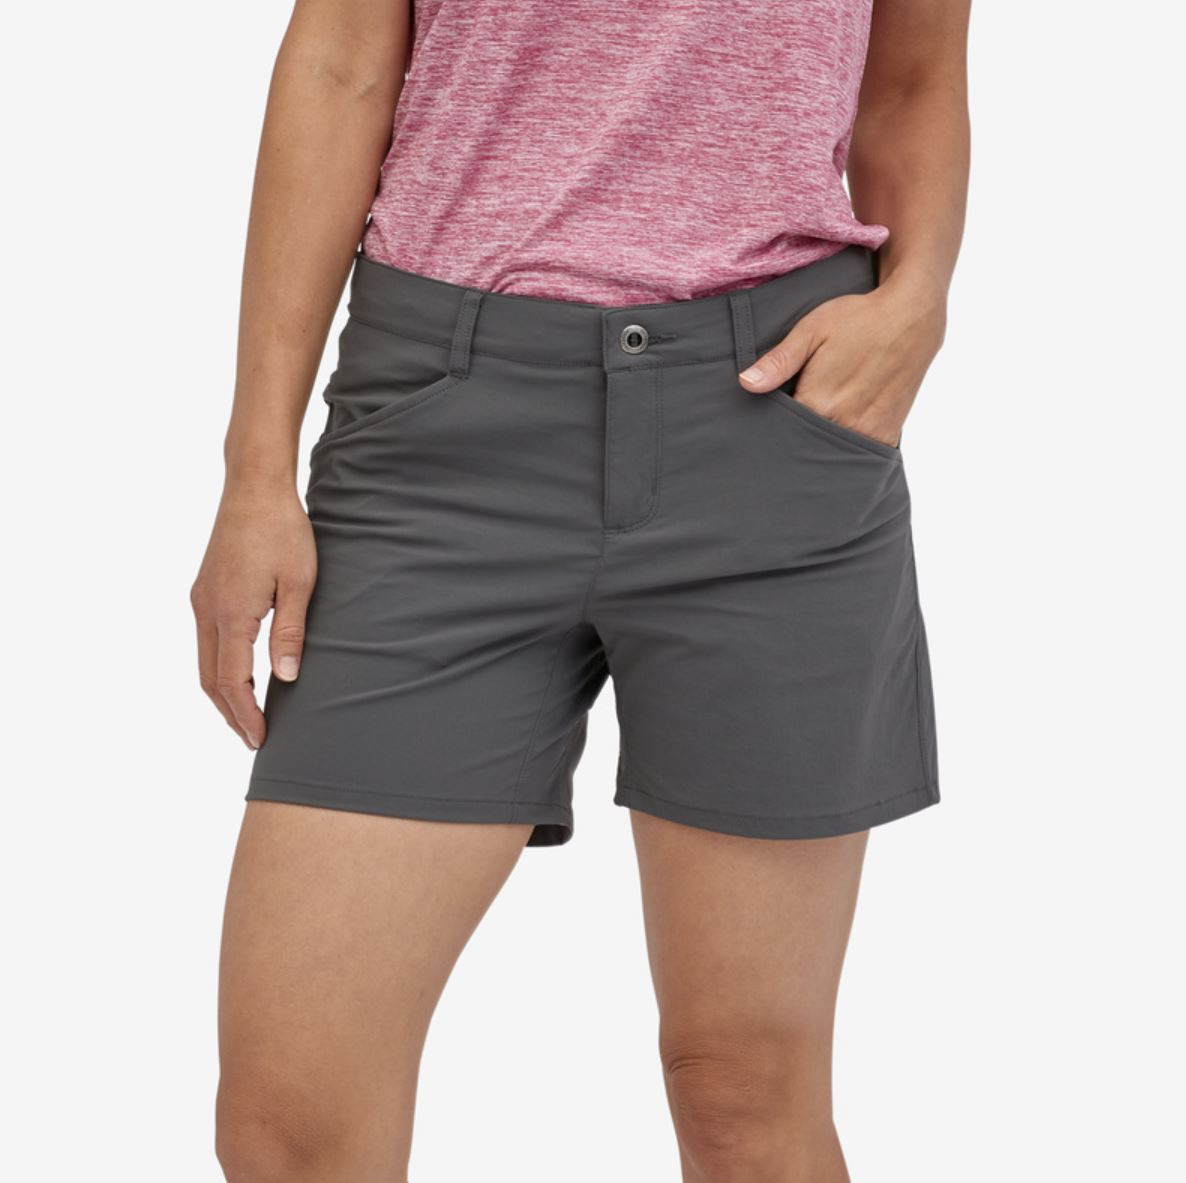 patagonia womens quandary short 5 inch in forge grey, front view on a model